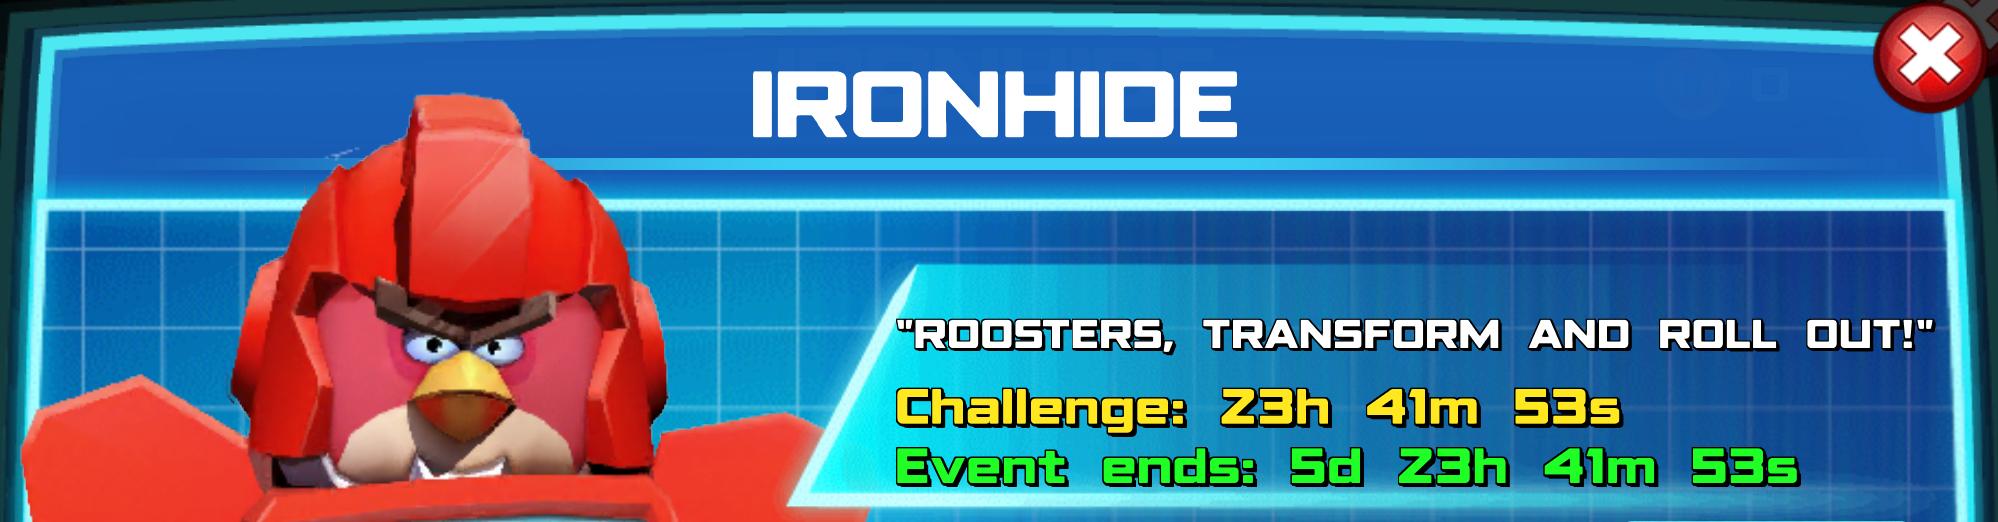 (Part of) The event banner for Ironhide